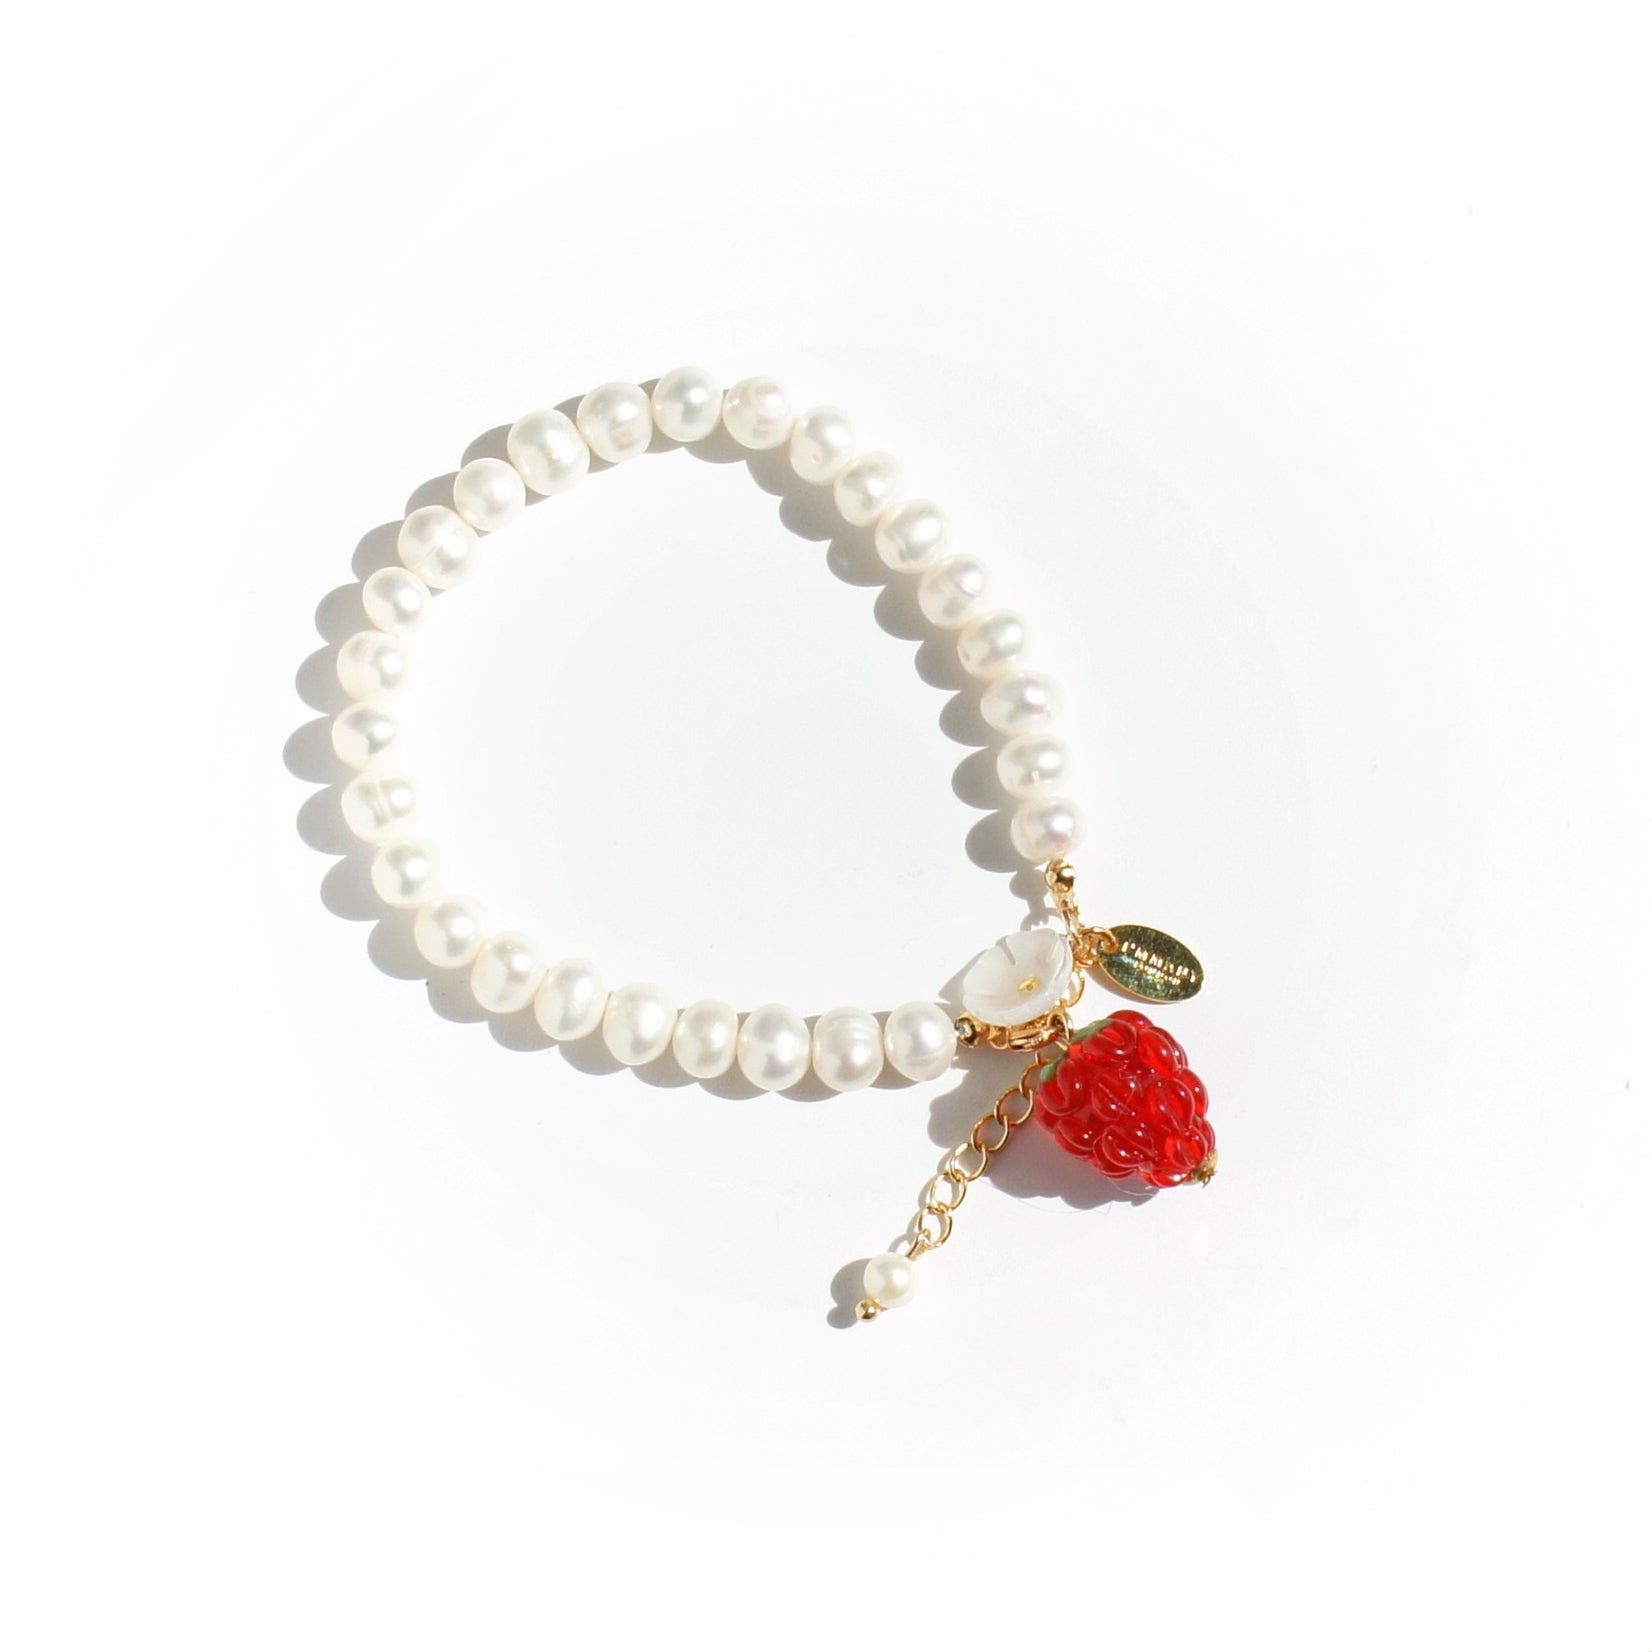 Very Berry Freshwater Pearl Bracelet with Lampwork Glass Raspberry and Mother of Pearl Flower Charm